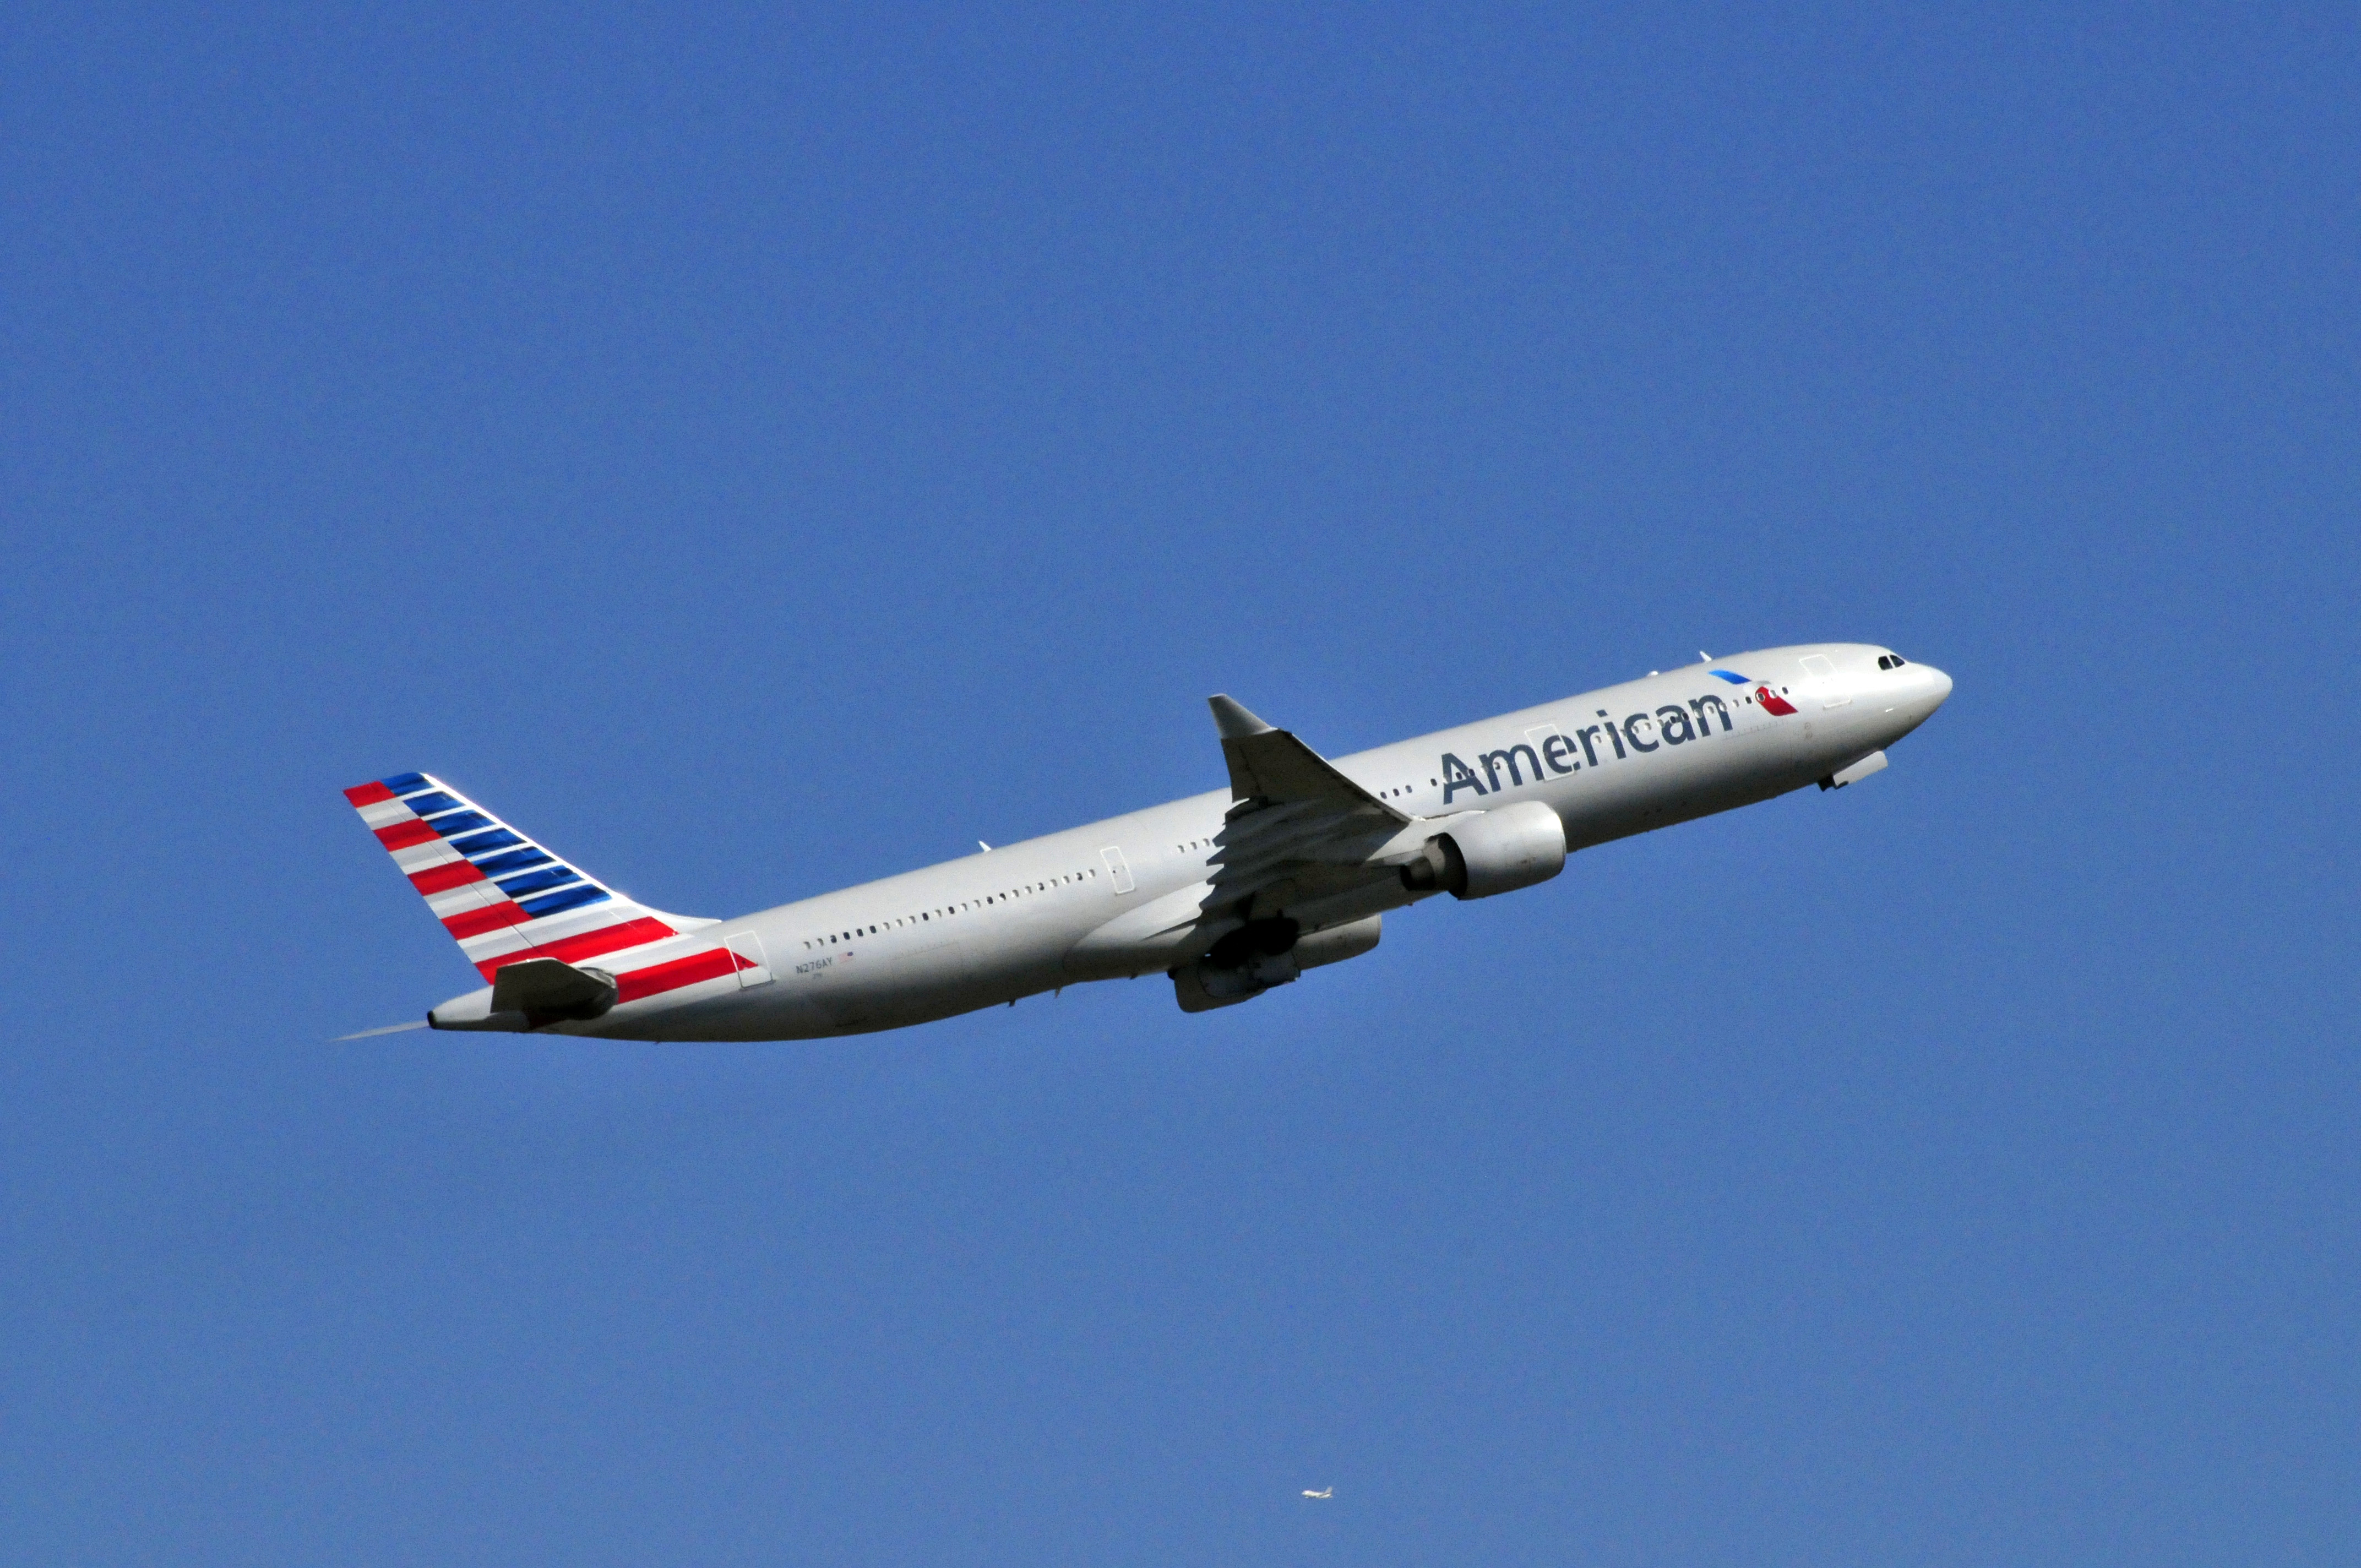 An Airbus A330 belonging to American Airlines. (Andia—UIG via Getty Images)